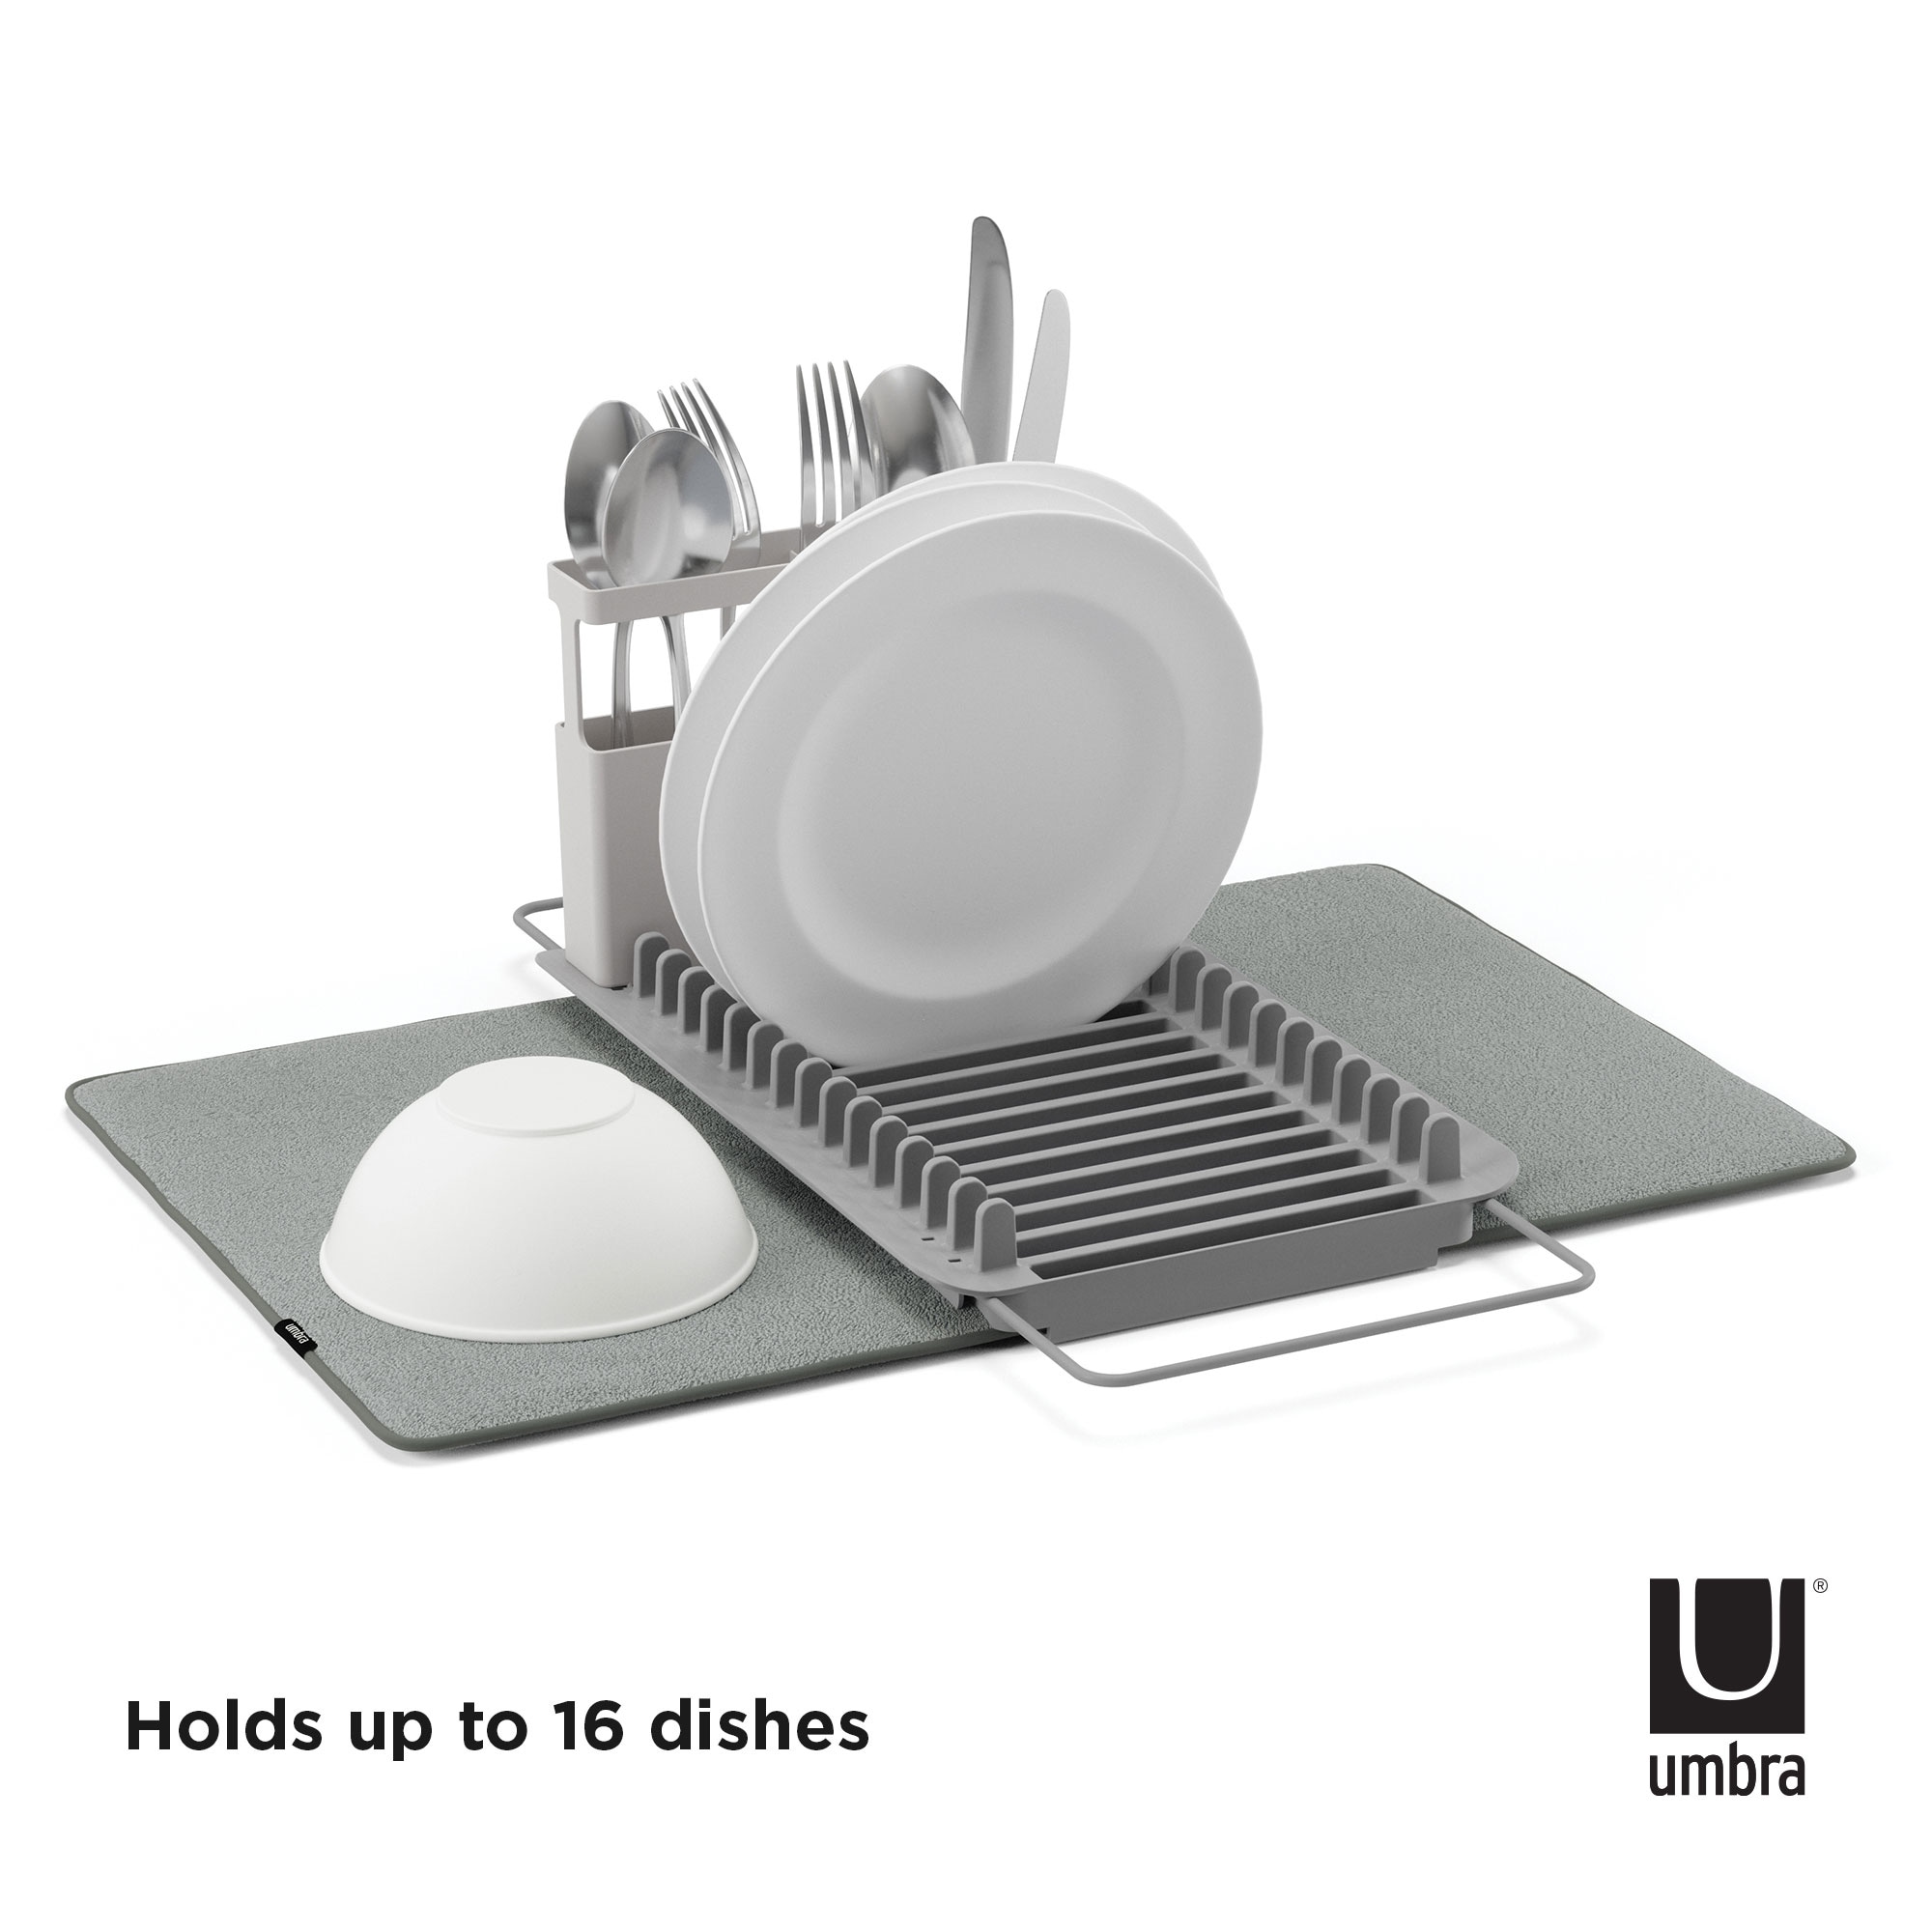 https://ak1.ostkcdn.com/images/products/is/images/direct/df517b6c2a932367f0291701313c6f4f86828801/Umbra-UDry-Over-the-Sink-Dish-Drying-Rack.jpg